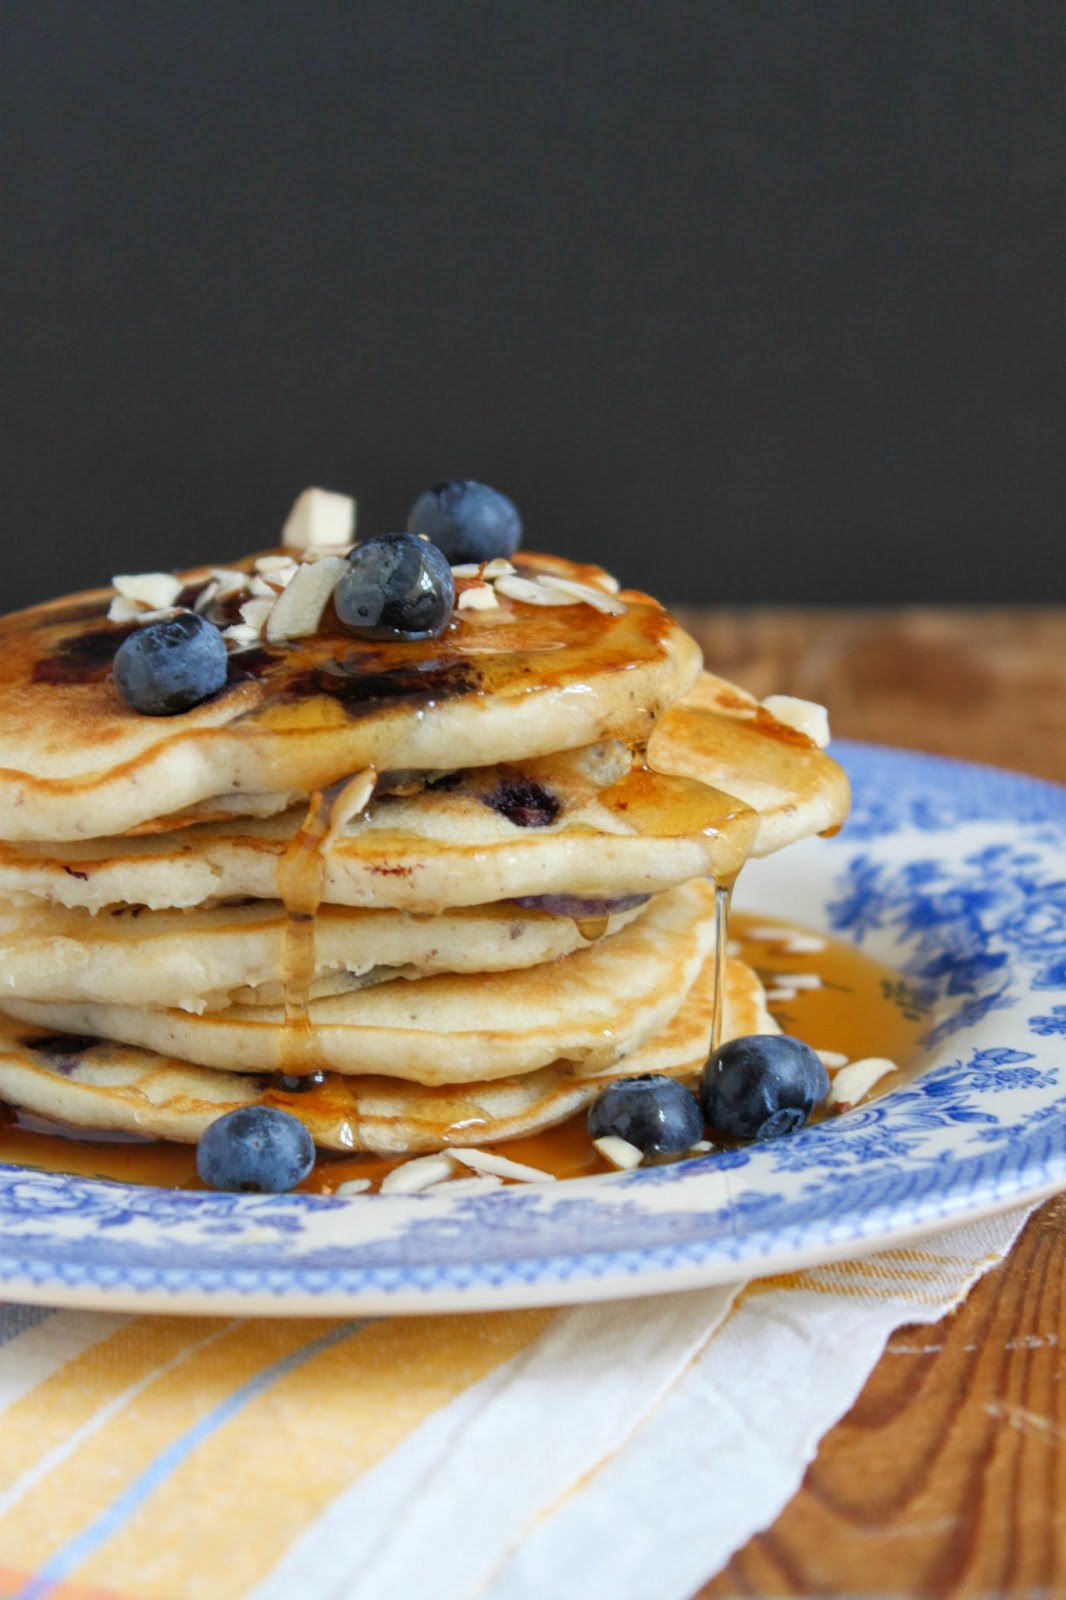 Food & Drink Around The World: An American Pancake Recipe - Easy For All